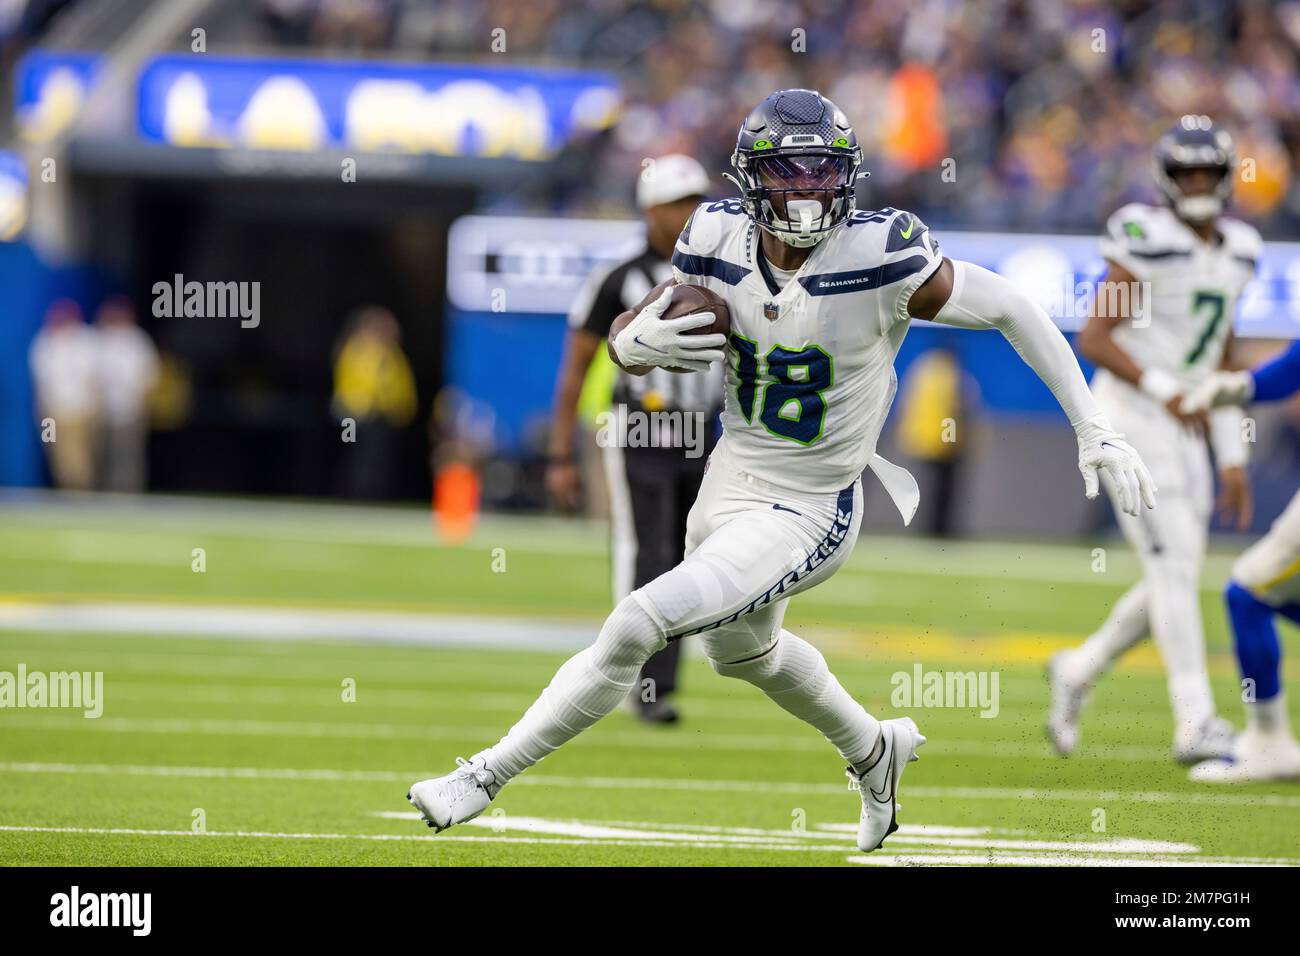 Seattle Seahawks wide receiver Laquon Treadwell (18) catches a pass and  runs against the Los Angeles Rams in an NFL football game, Sunday, Dec. 4,  2022, in Inglewood, Calif. Seahawks won 27-23. (